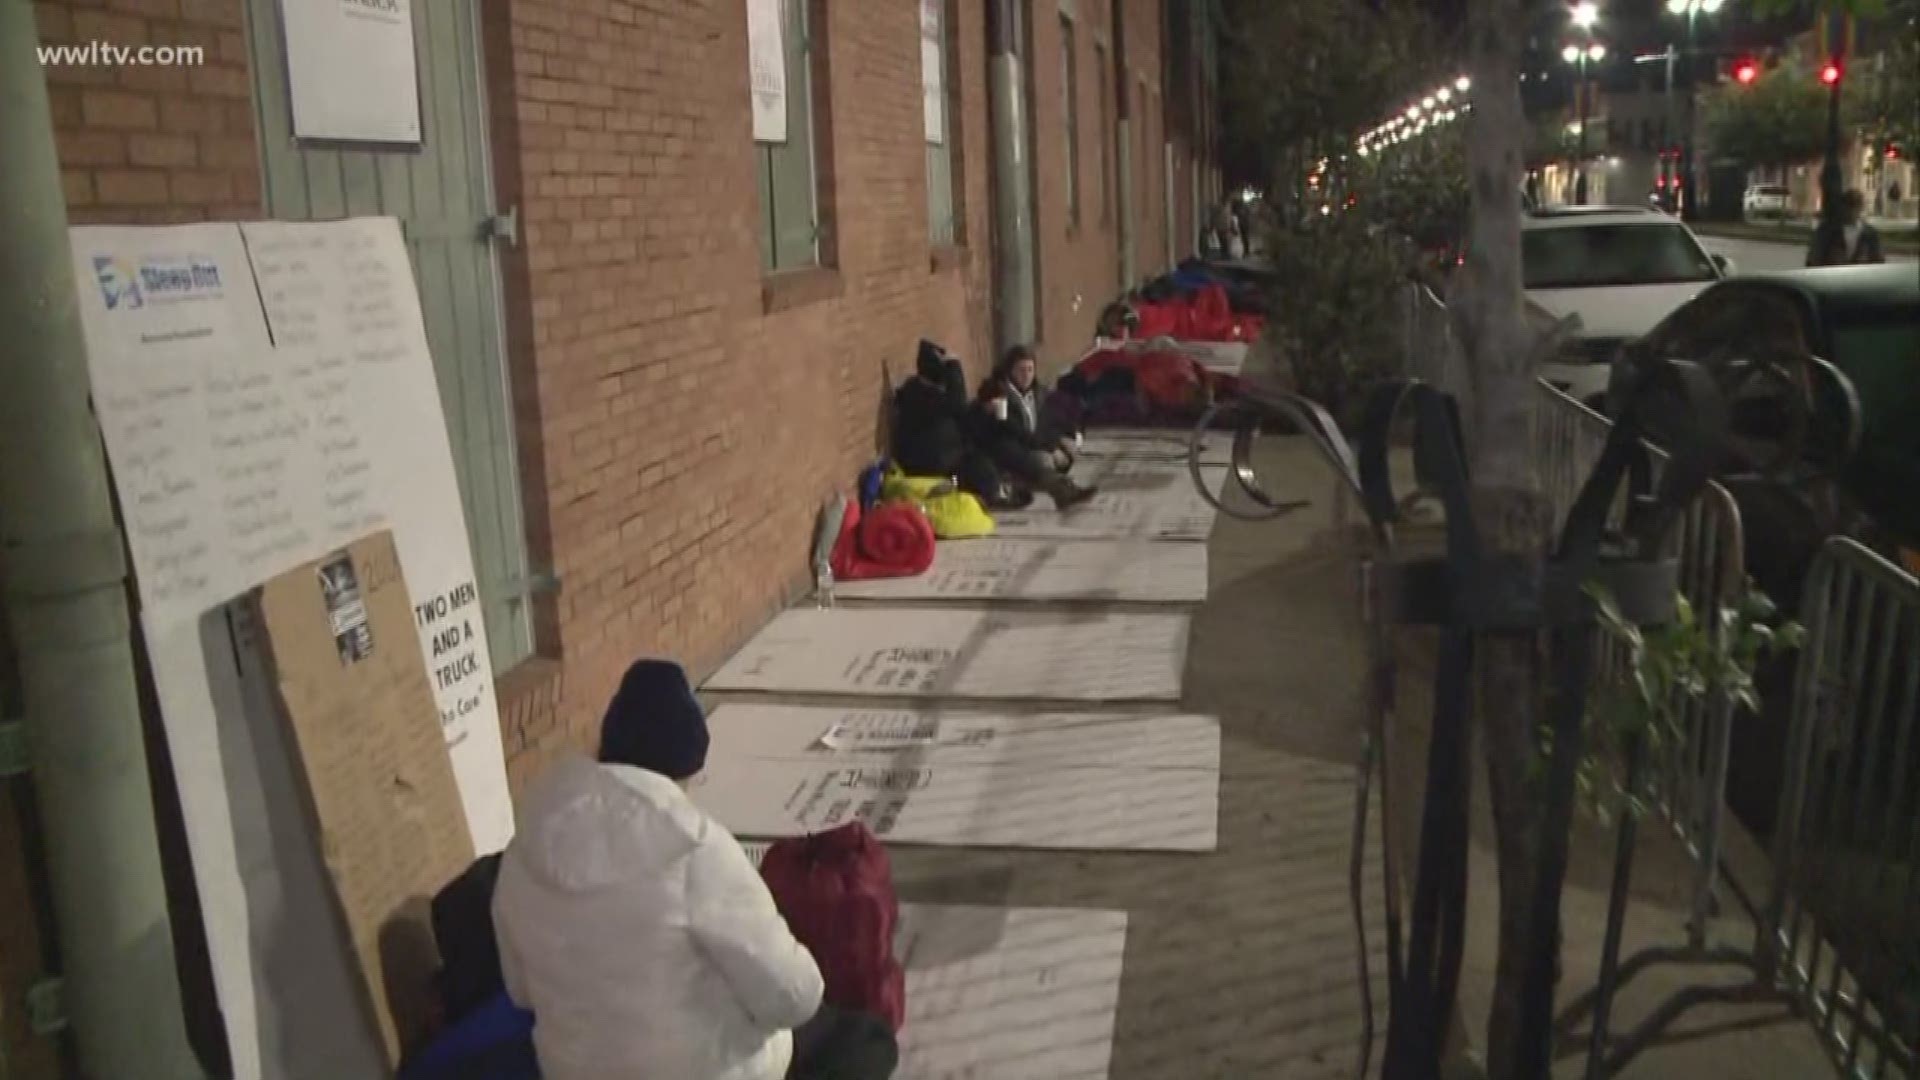 More than 200 people came out to North Rampart Street with nothing but a sleeping bag and cardboard box to take part in Covenant House's annual "Sleep Out" event.